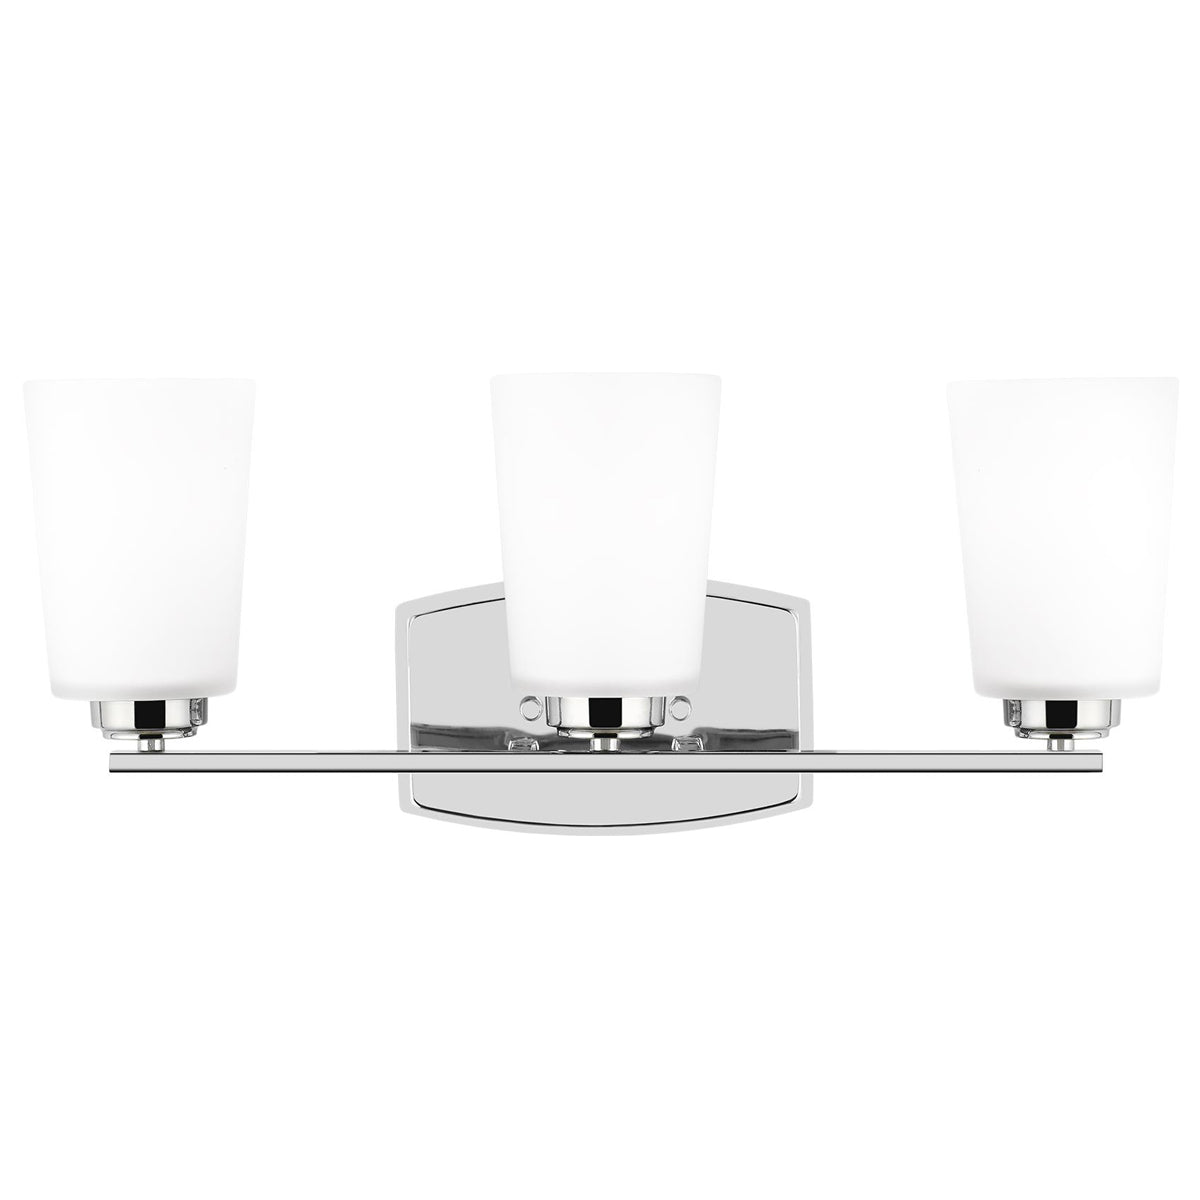 Sea Gull Lighting Franport 3-Light Wall/Bath Sconce without Bulb